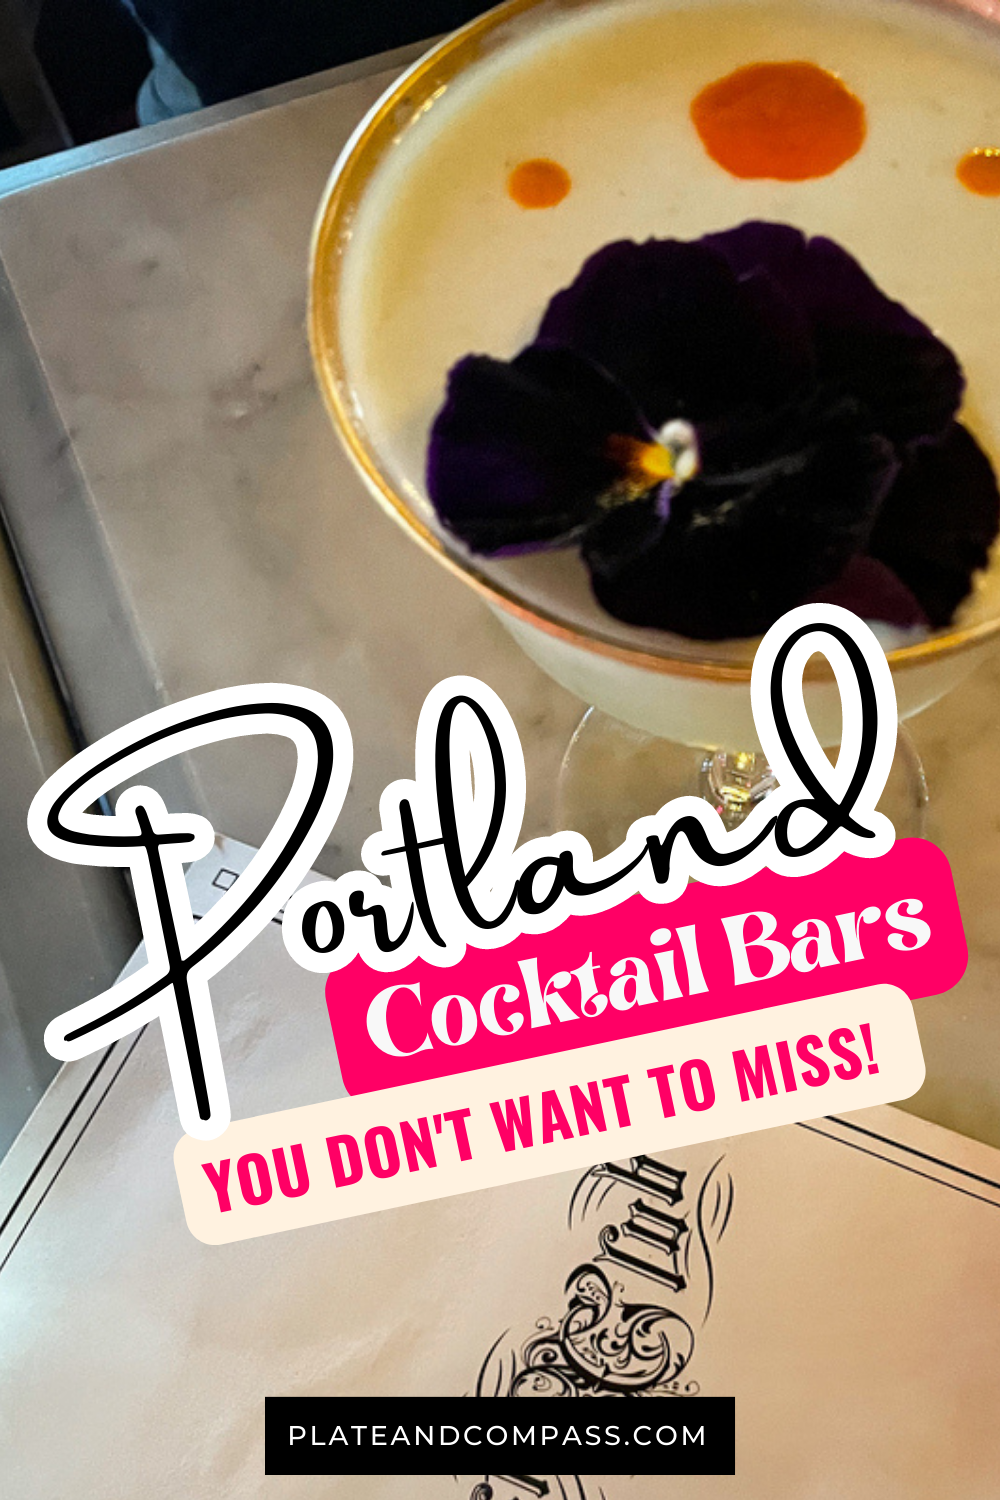 Portland Cocktail Bars You Don't Want to Miss!